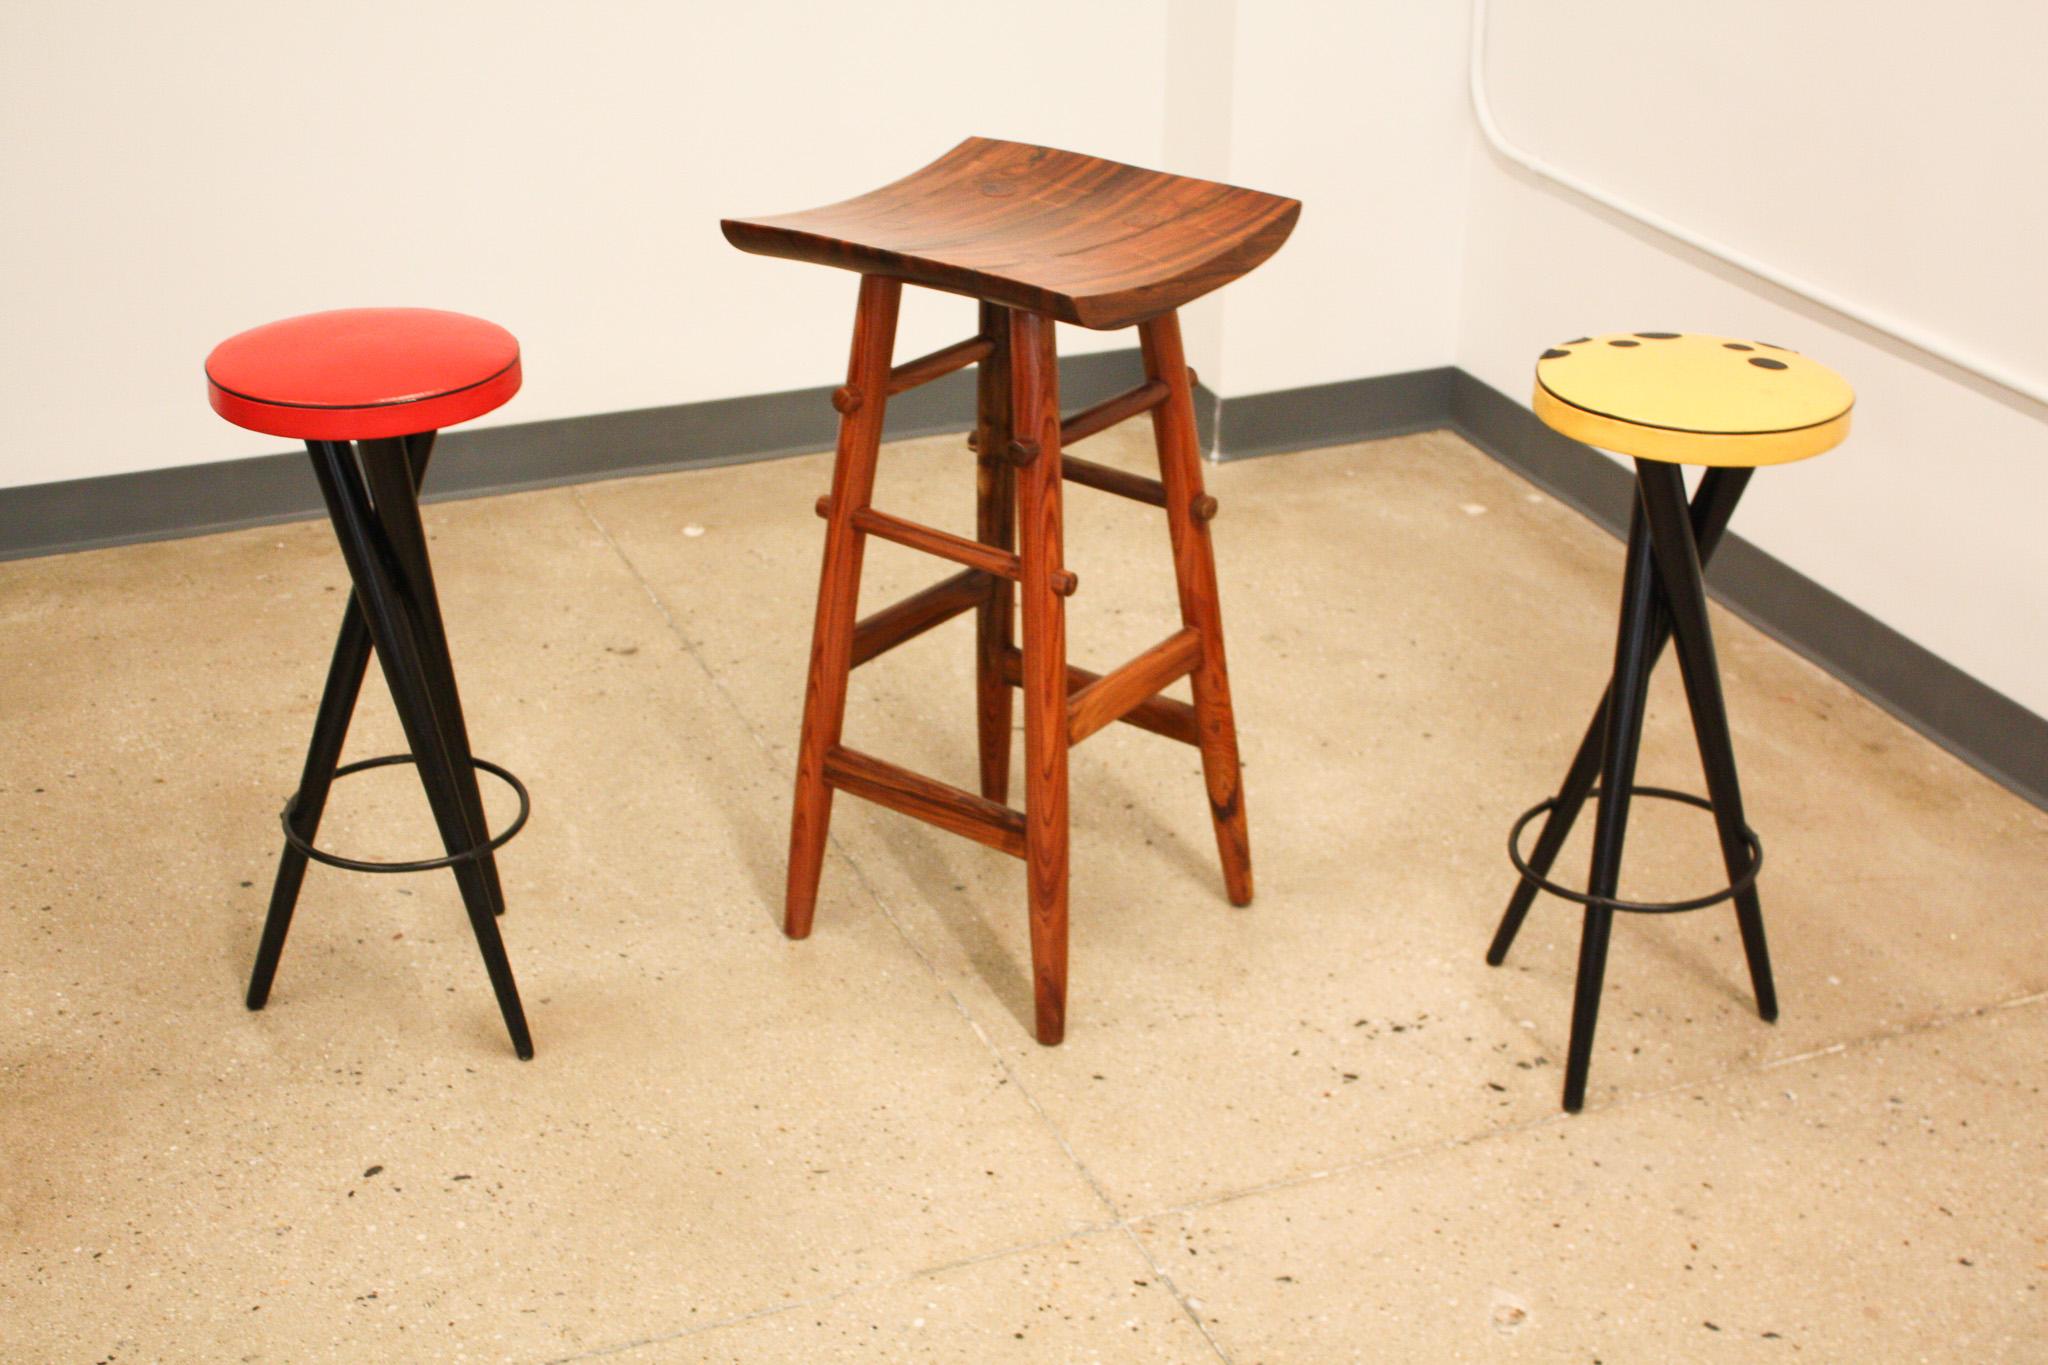 Woodwork Brazilian Modern Bar Stools in Hardwood & Red & Yellow Leather S, Brazil, 1950s For Sale